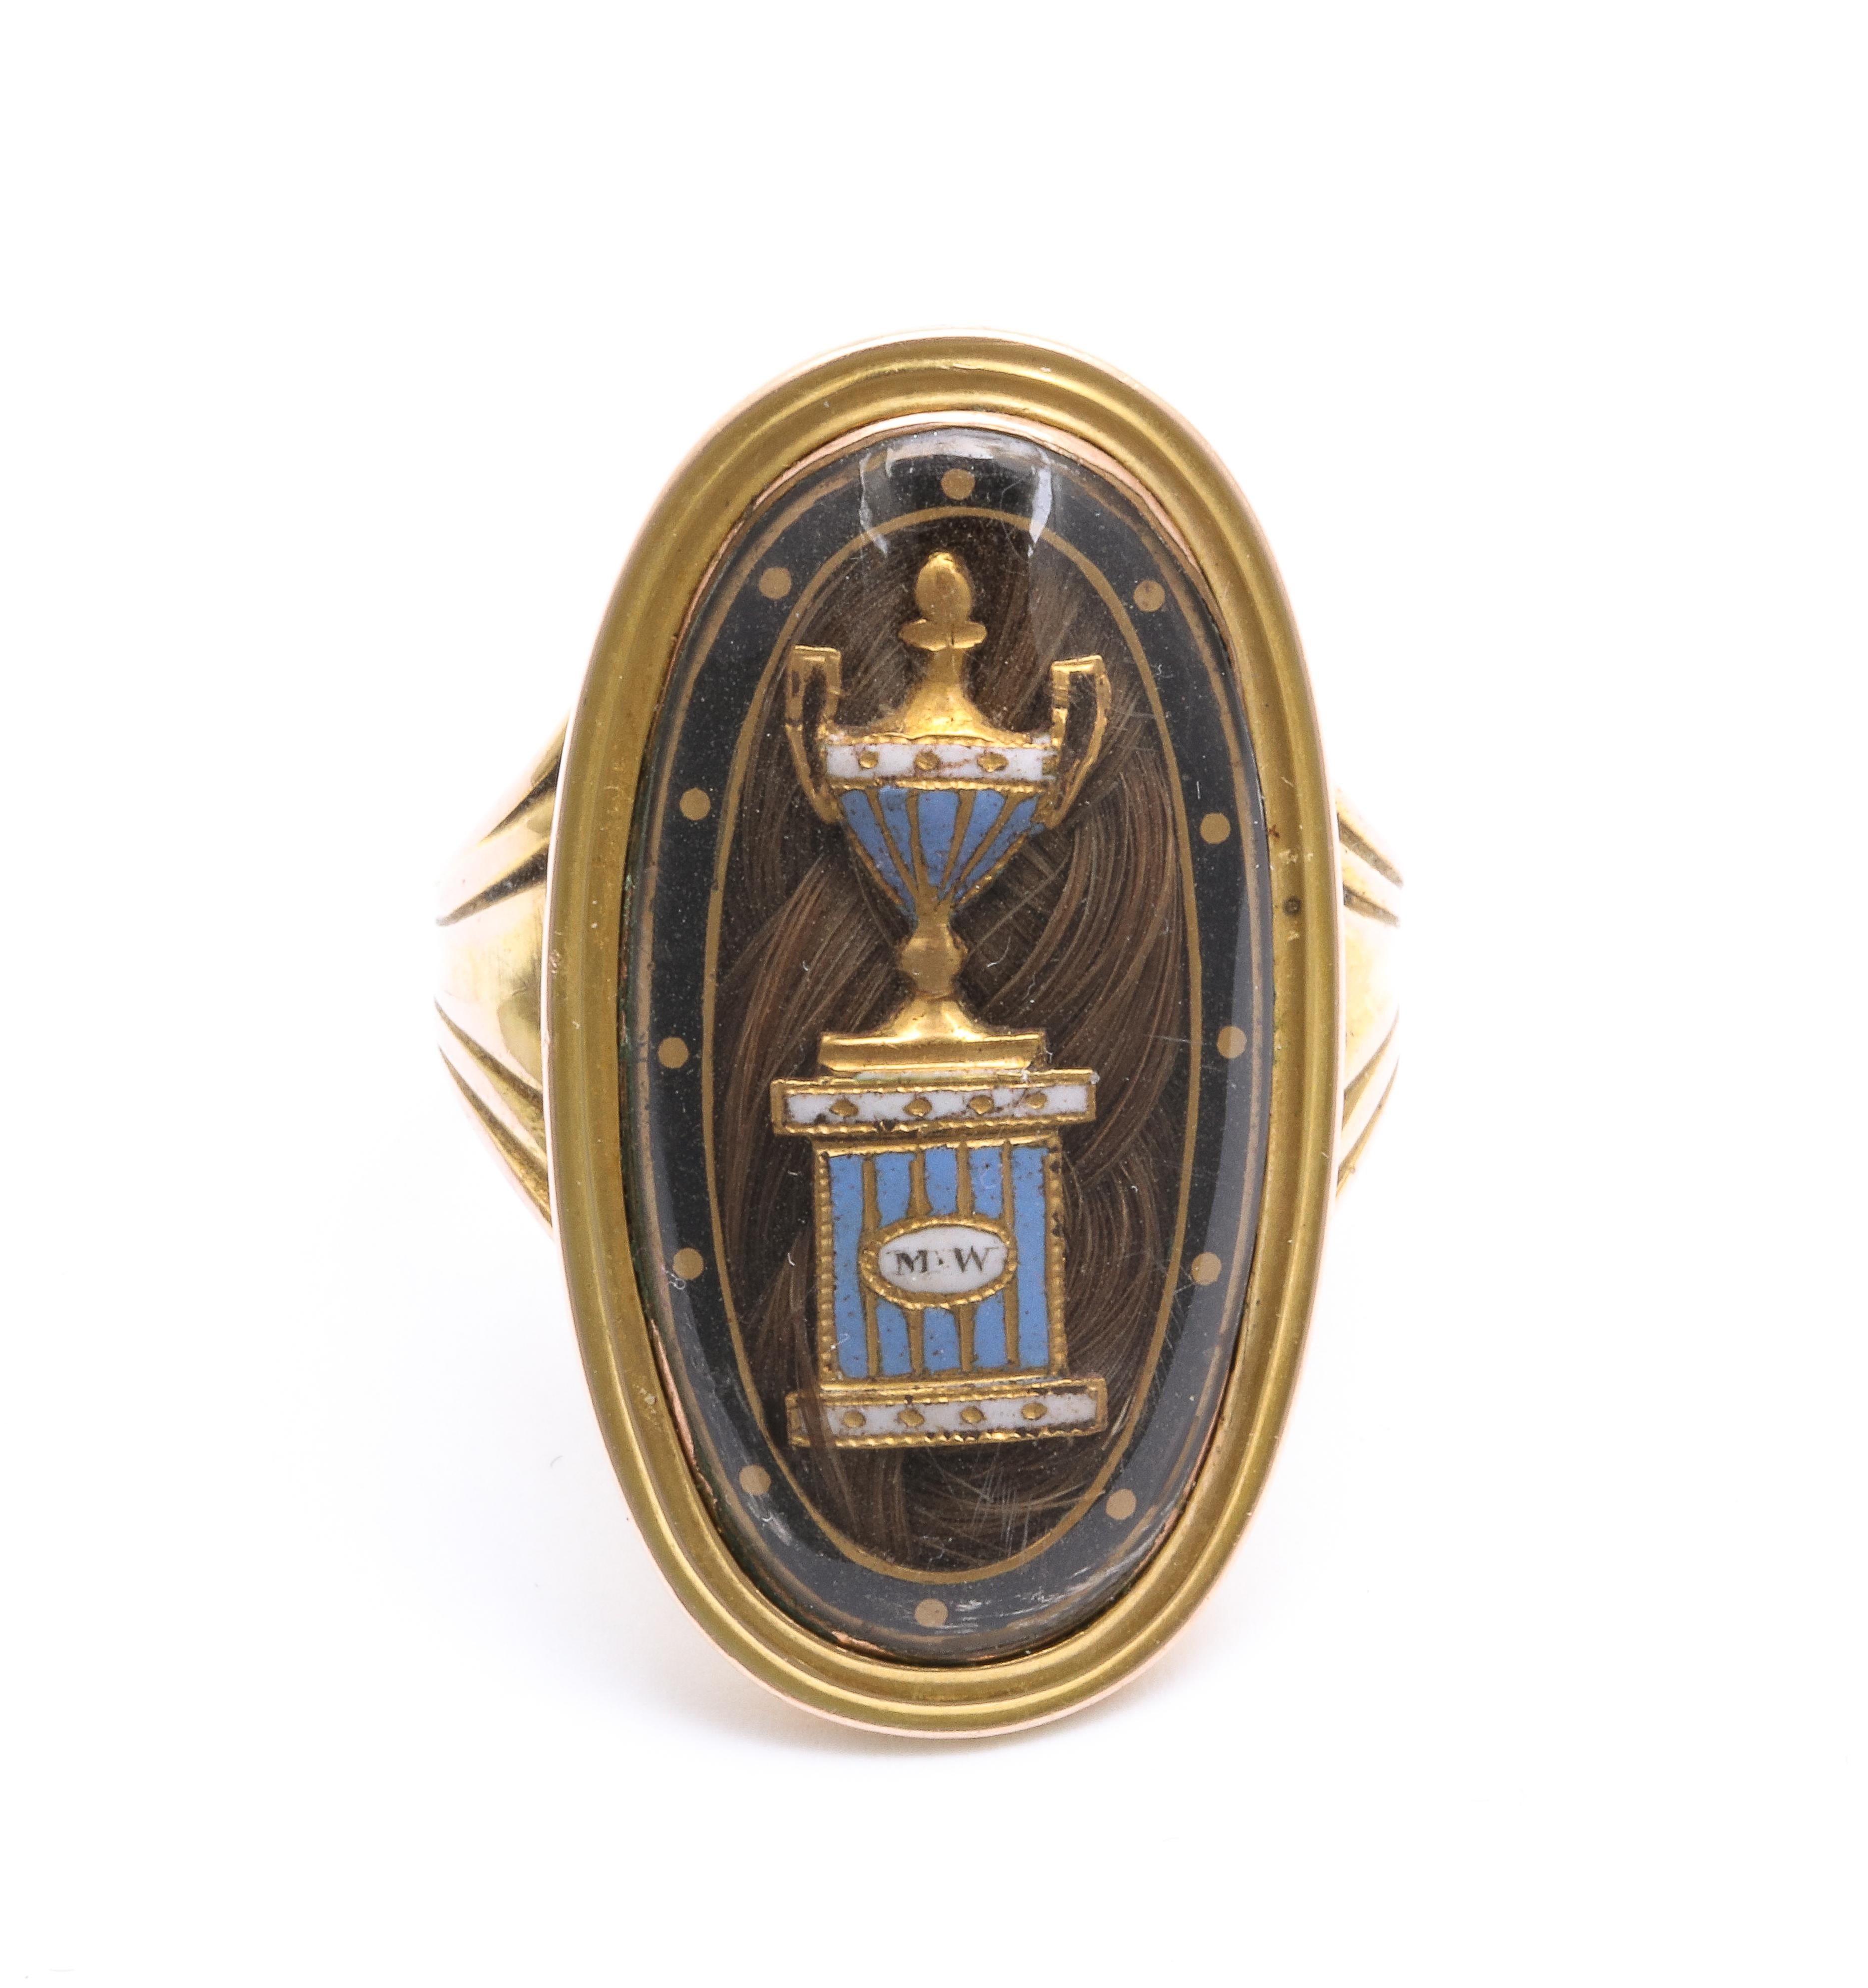 Georgian rings such as this, made in 1792, are curved to fit perfectly to your finger. This marvelous example is 15 KT gold with a fine inner frame of dark brown enamel on which gold dots travel the perimeter. Under the crystal is a gold and light